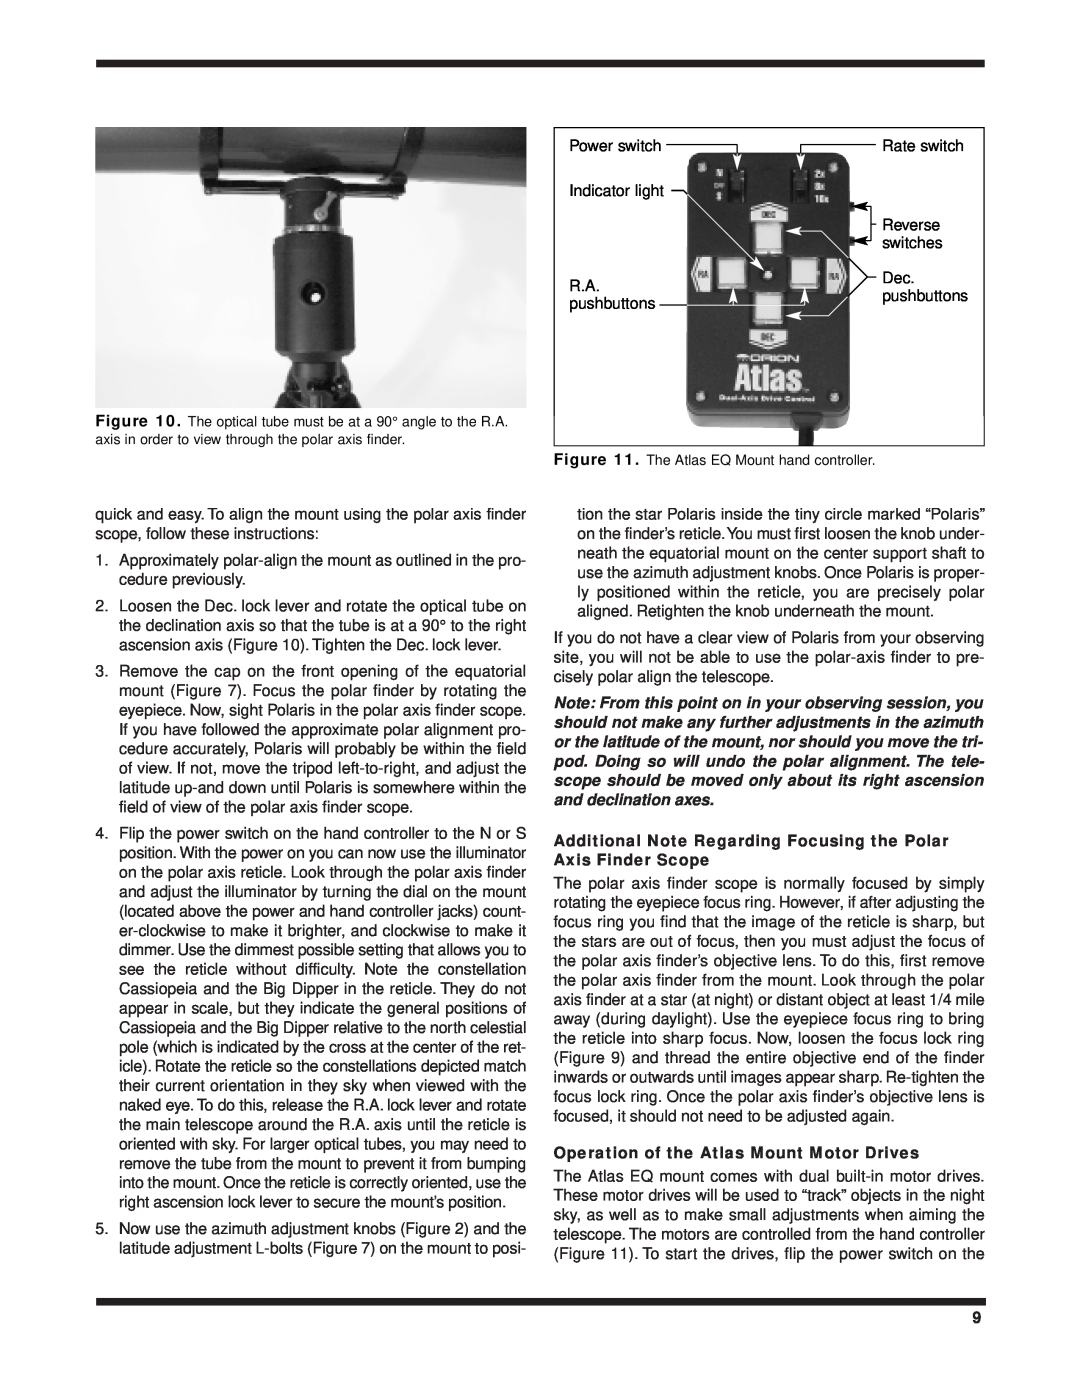 Orion 8 EQ instruction manual Operation of the Atlas Mount Motor Drives 